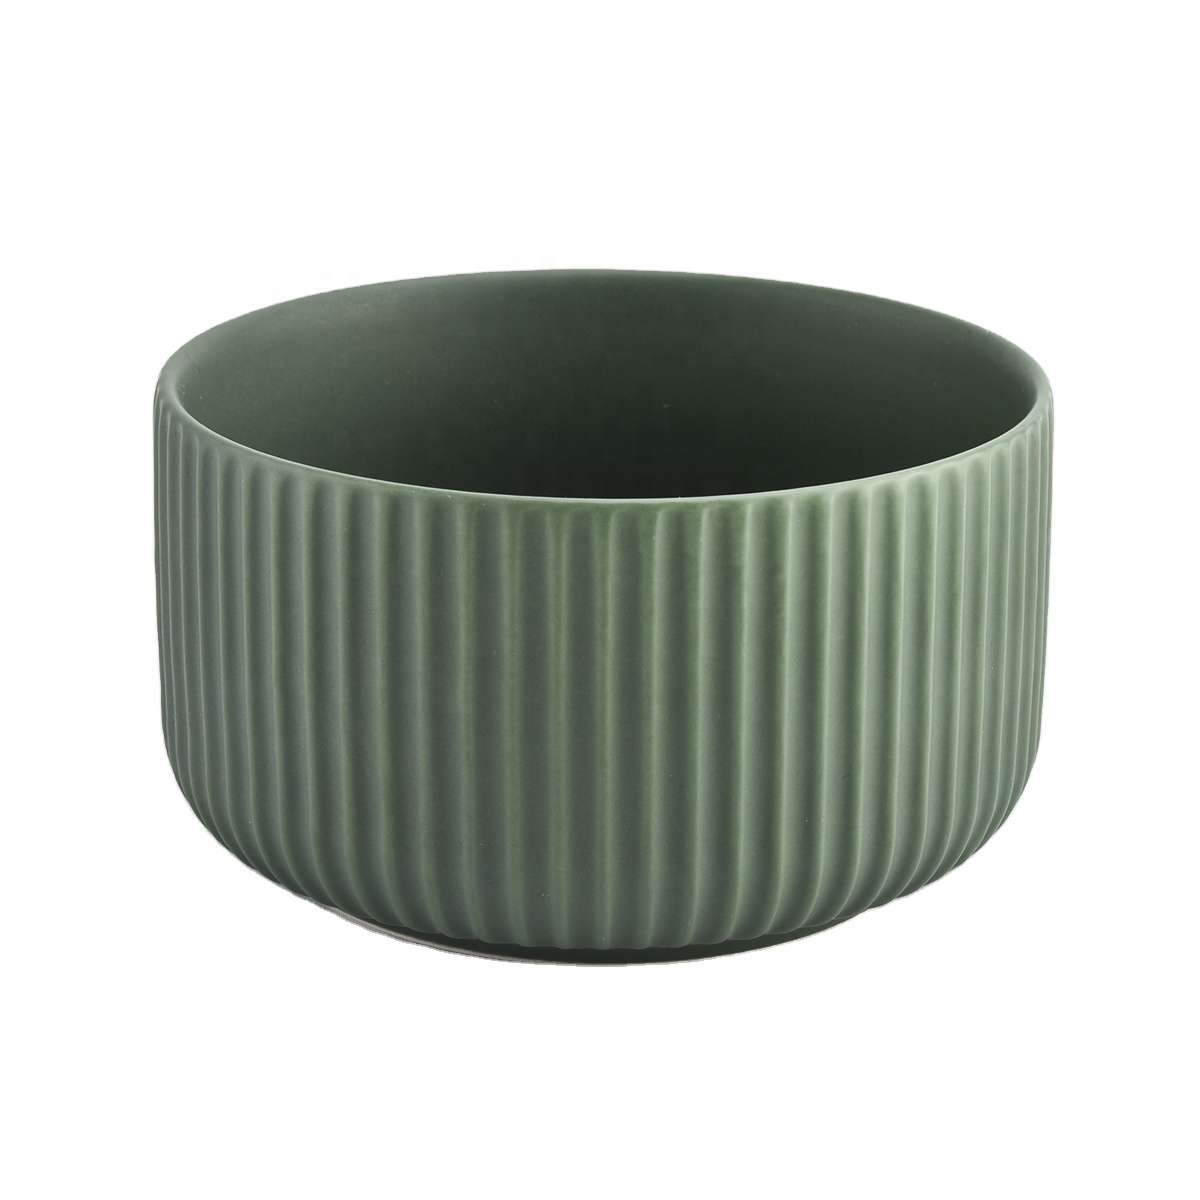 green ceramic candle holders for candle making